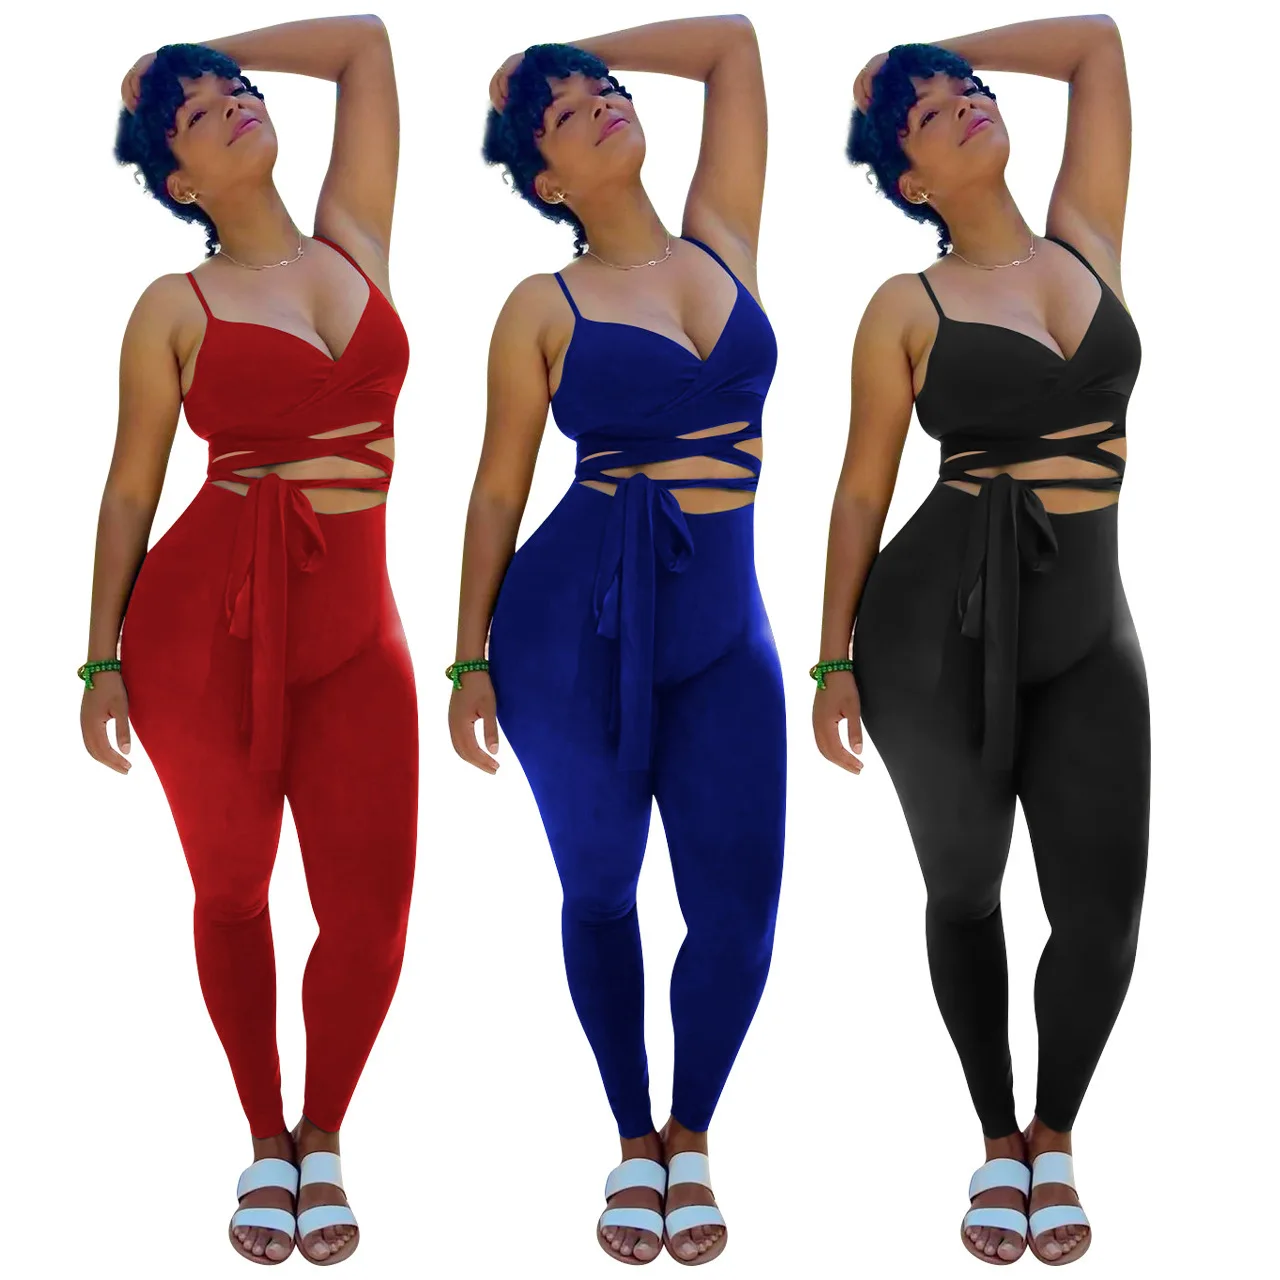 

2022 New Arrivals Bandage Crop Top 2 Piece Leggings Set Spring Women Clothing Women's Tube Top Jogger Outfits